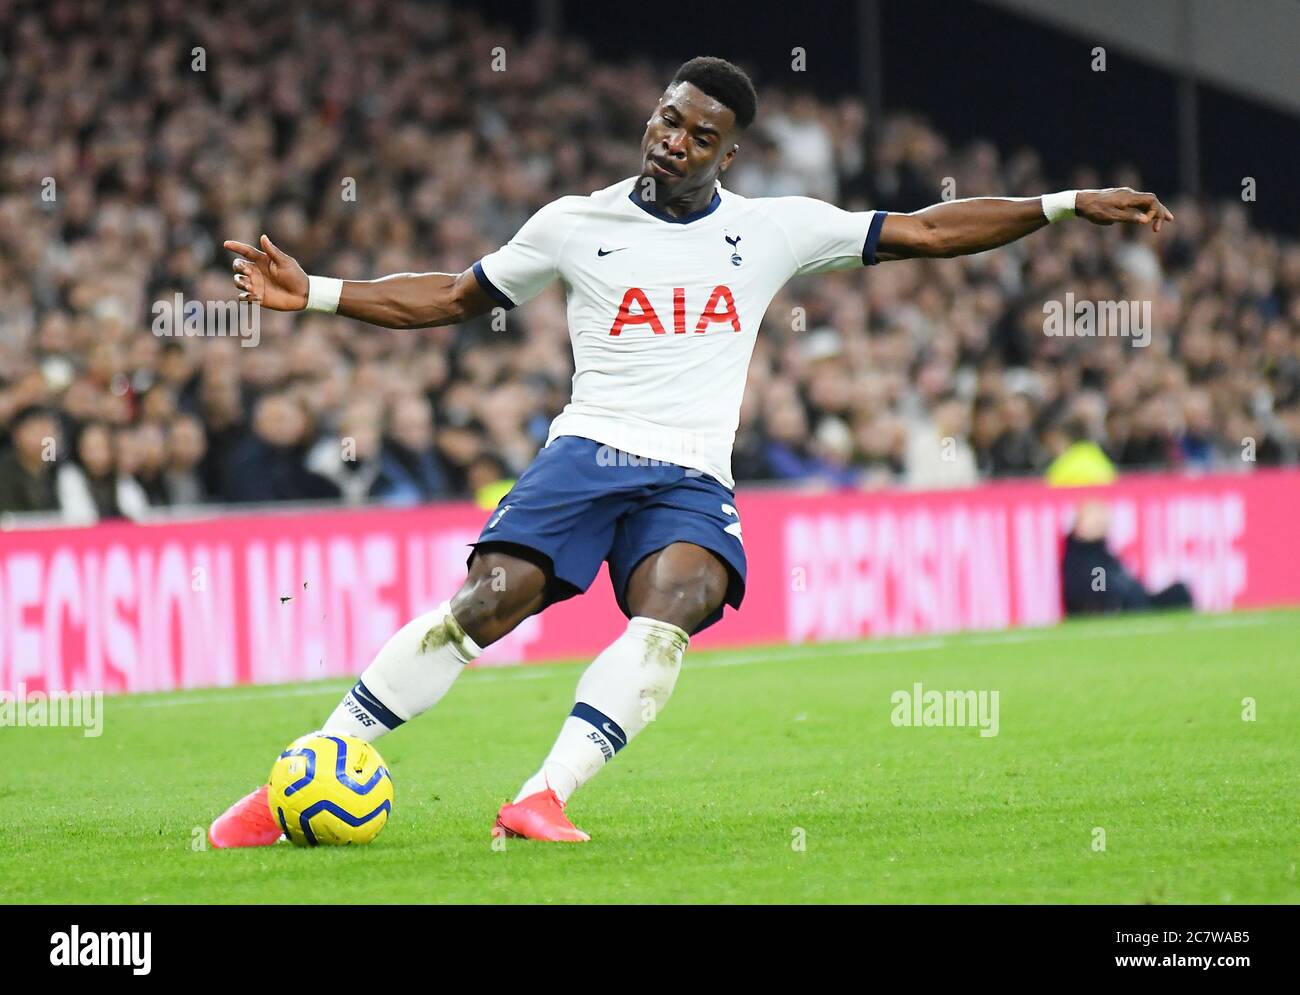 LONDON, ENGLAND - FEBRUARY 2, 2020: Serge Aurier of Tottenham pictured during the 2019/20 Premier League game between Tottenham Hotspur and Manchester City at Tottenham Hotspur Stadium. Stock Photo